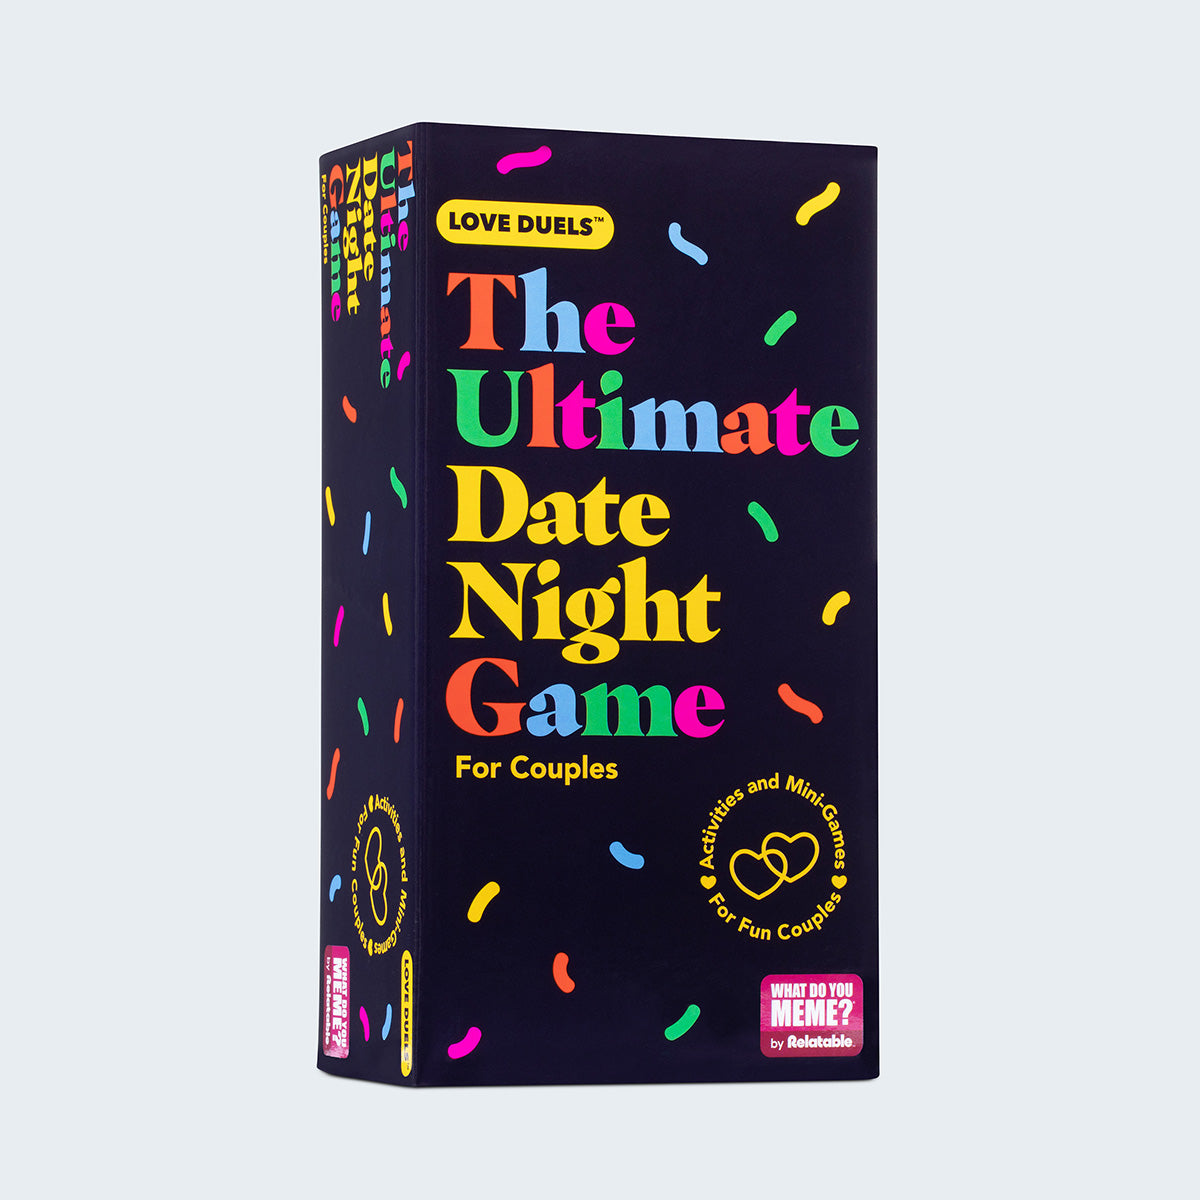 The Ultimate Date Night Game For Fun Couples